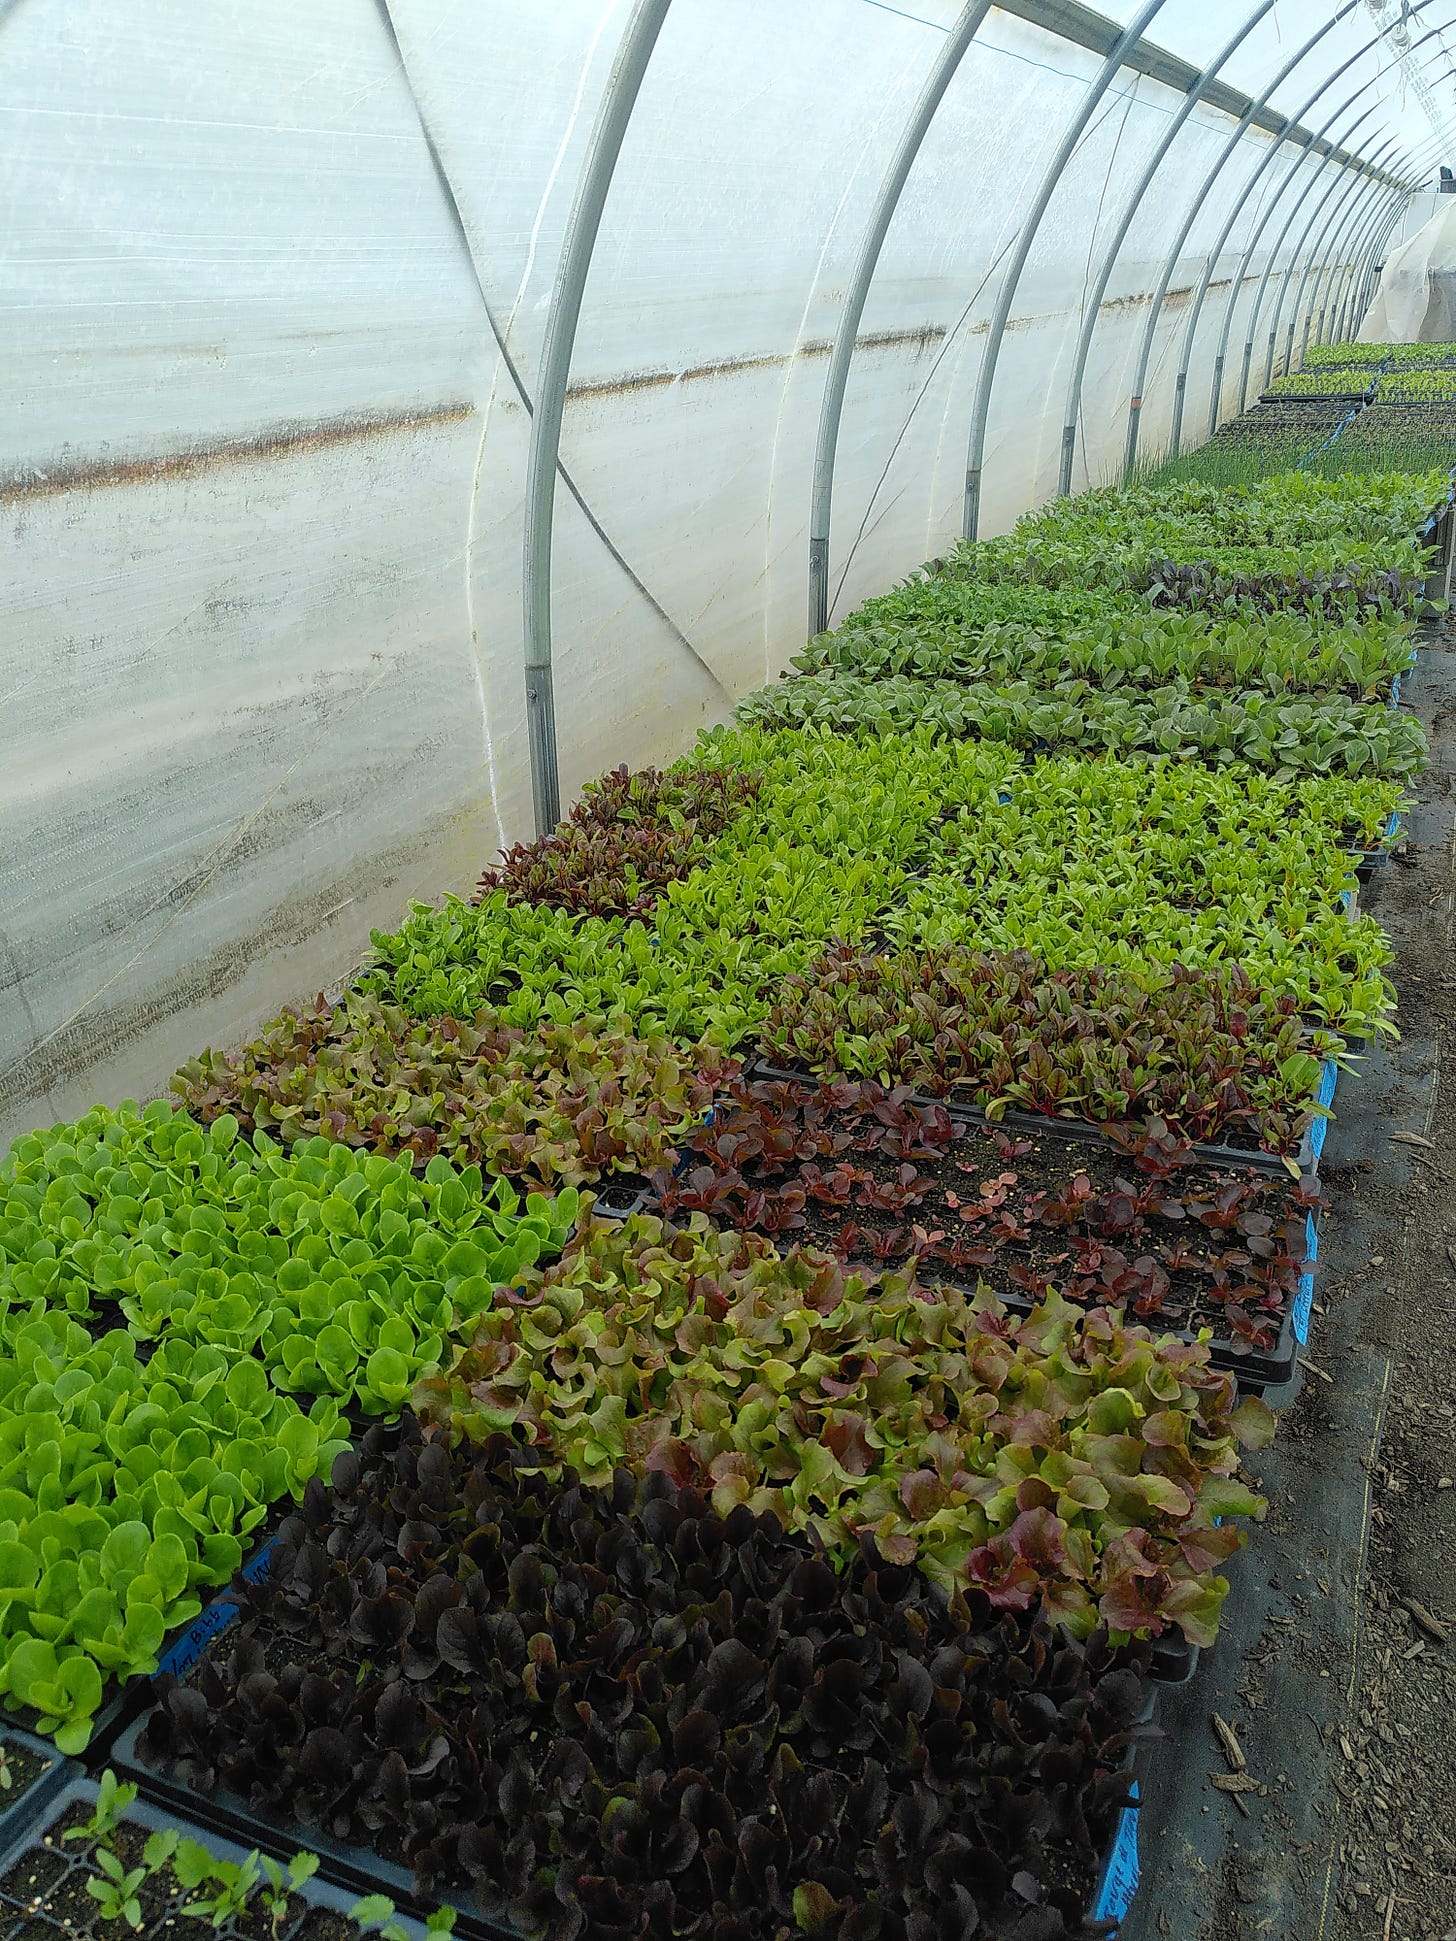 A table full of lettuce seedings and other extends into the distance under the plastic cover of a hightunnel.